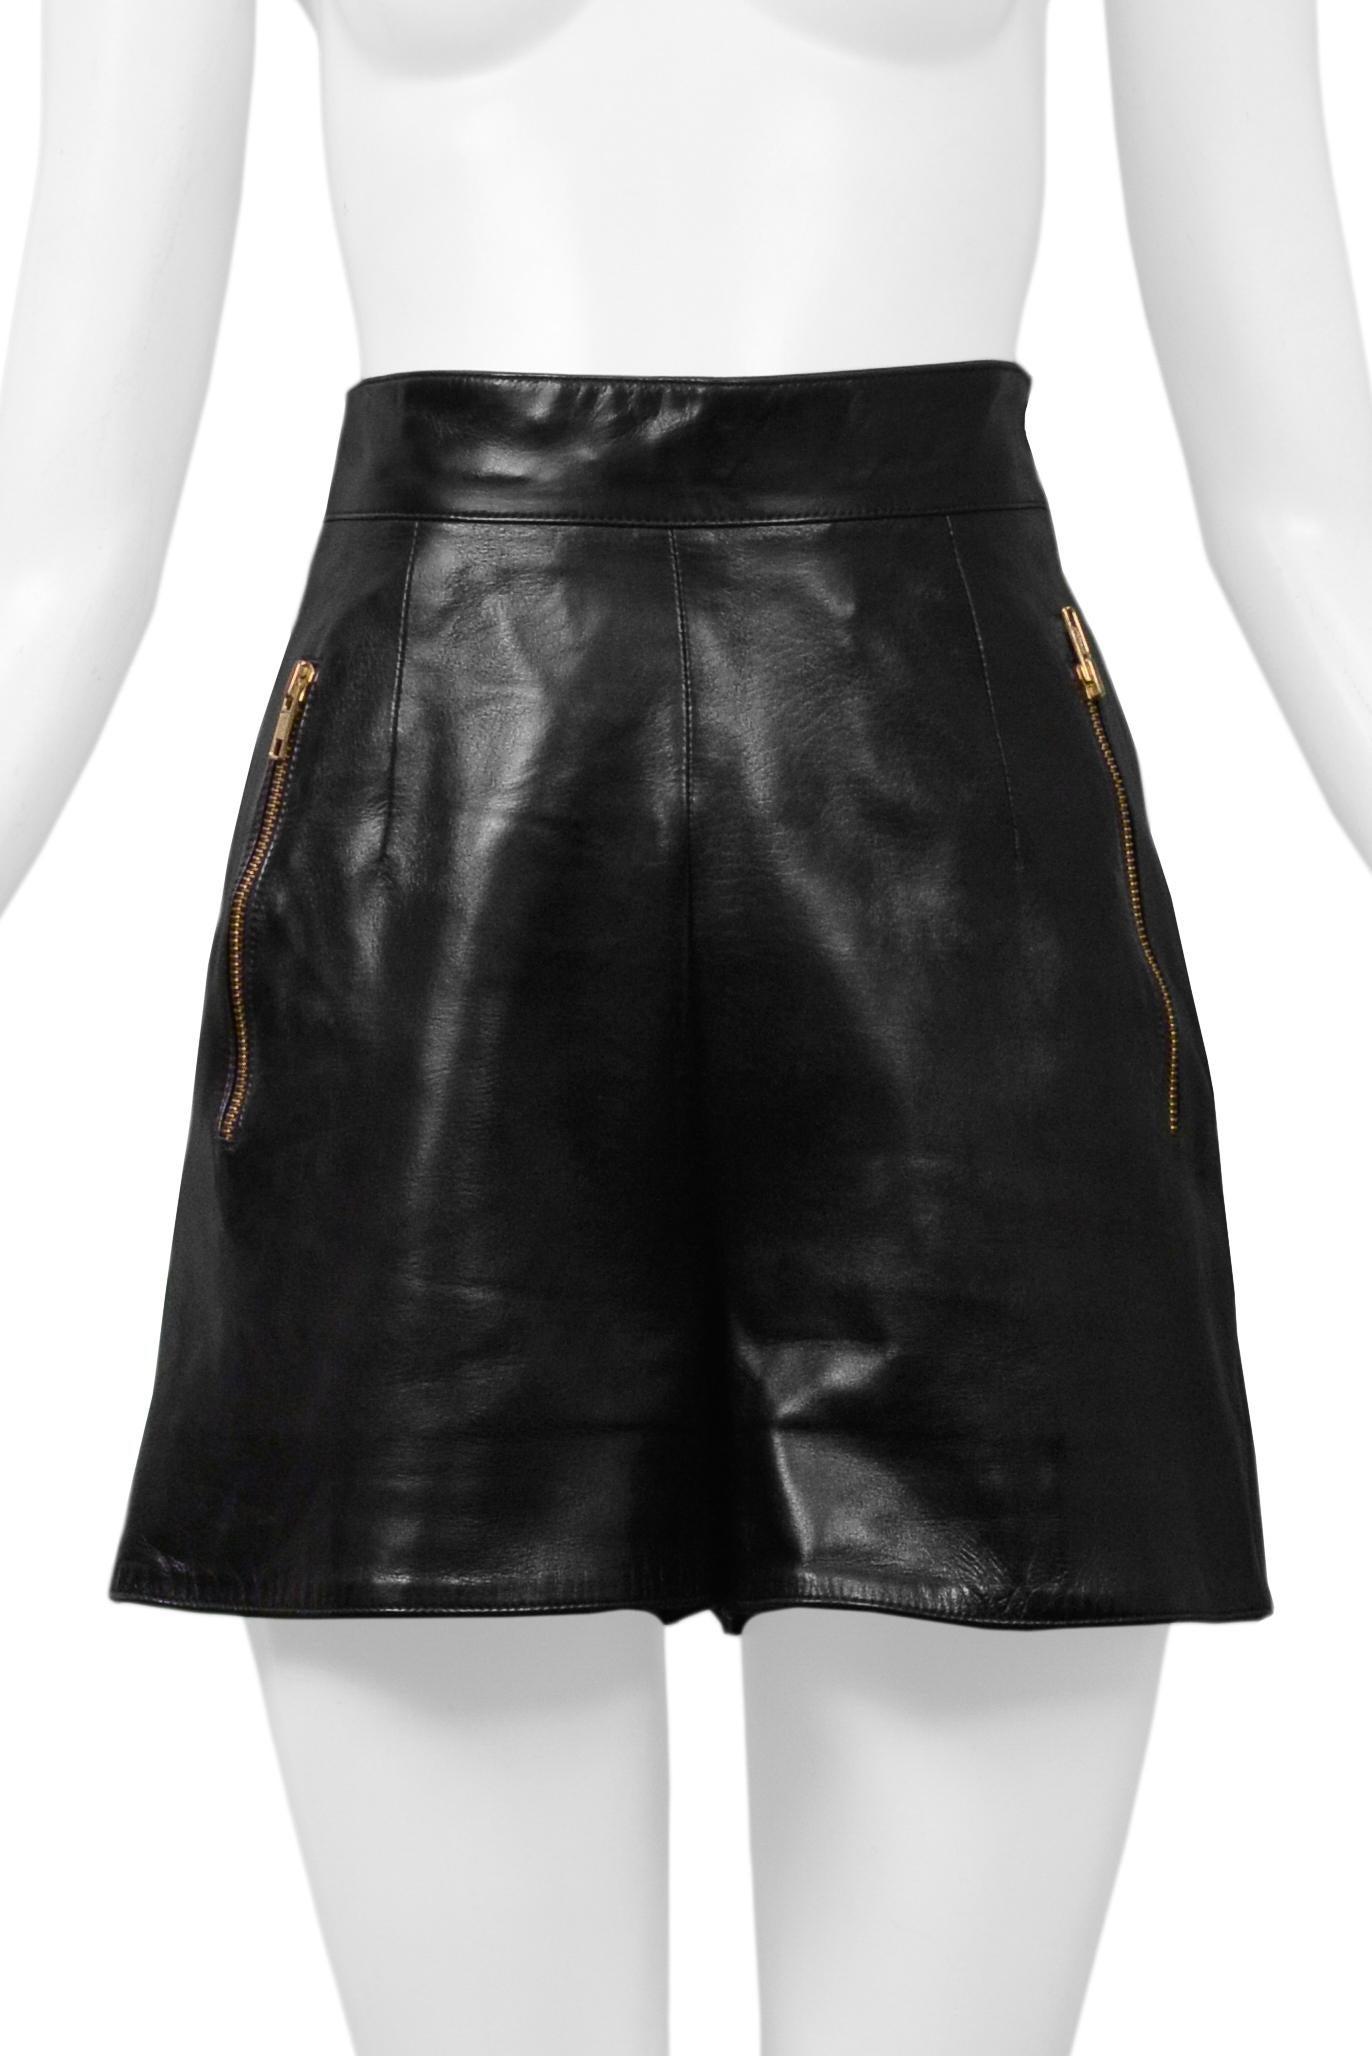 Claude Montana Black Leather Shorts with Gold Zippers In Excellent Condition For Sale In Los Angeles, CA